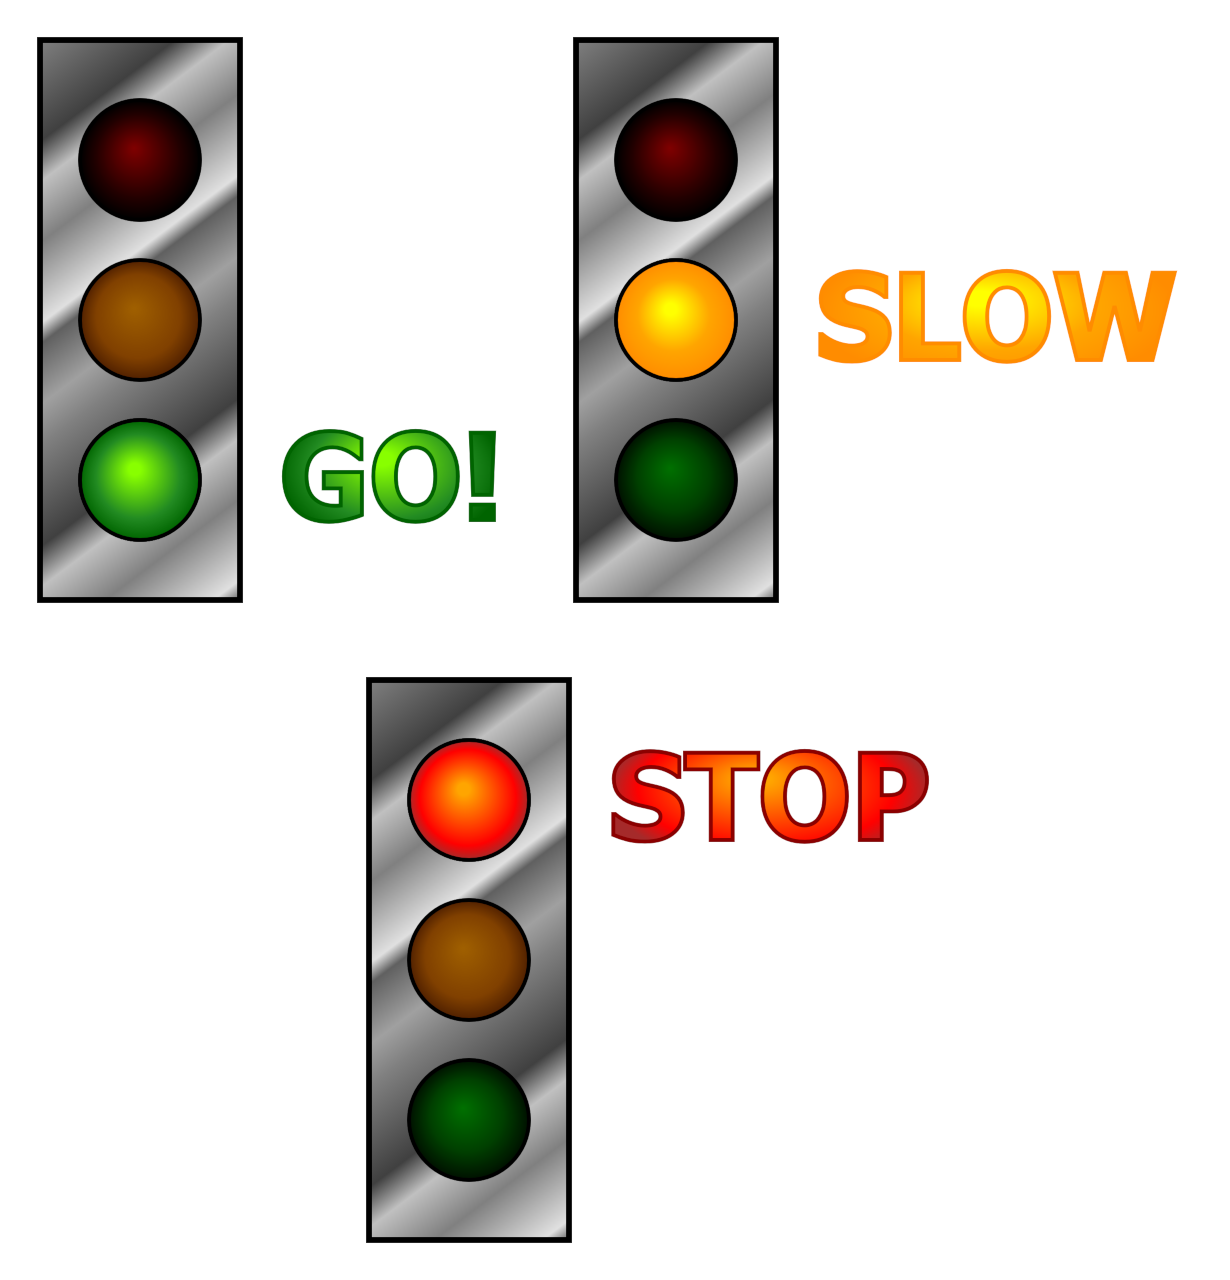 The three states of the stoplight.  This time, there is extra space beside each drawing, to make room for decorative text (with the words STOP, SLOW, or GO!) aligned beside the bright light, in matching gradient colors.